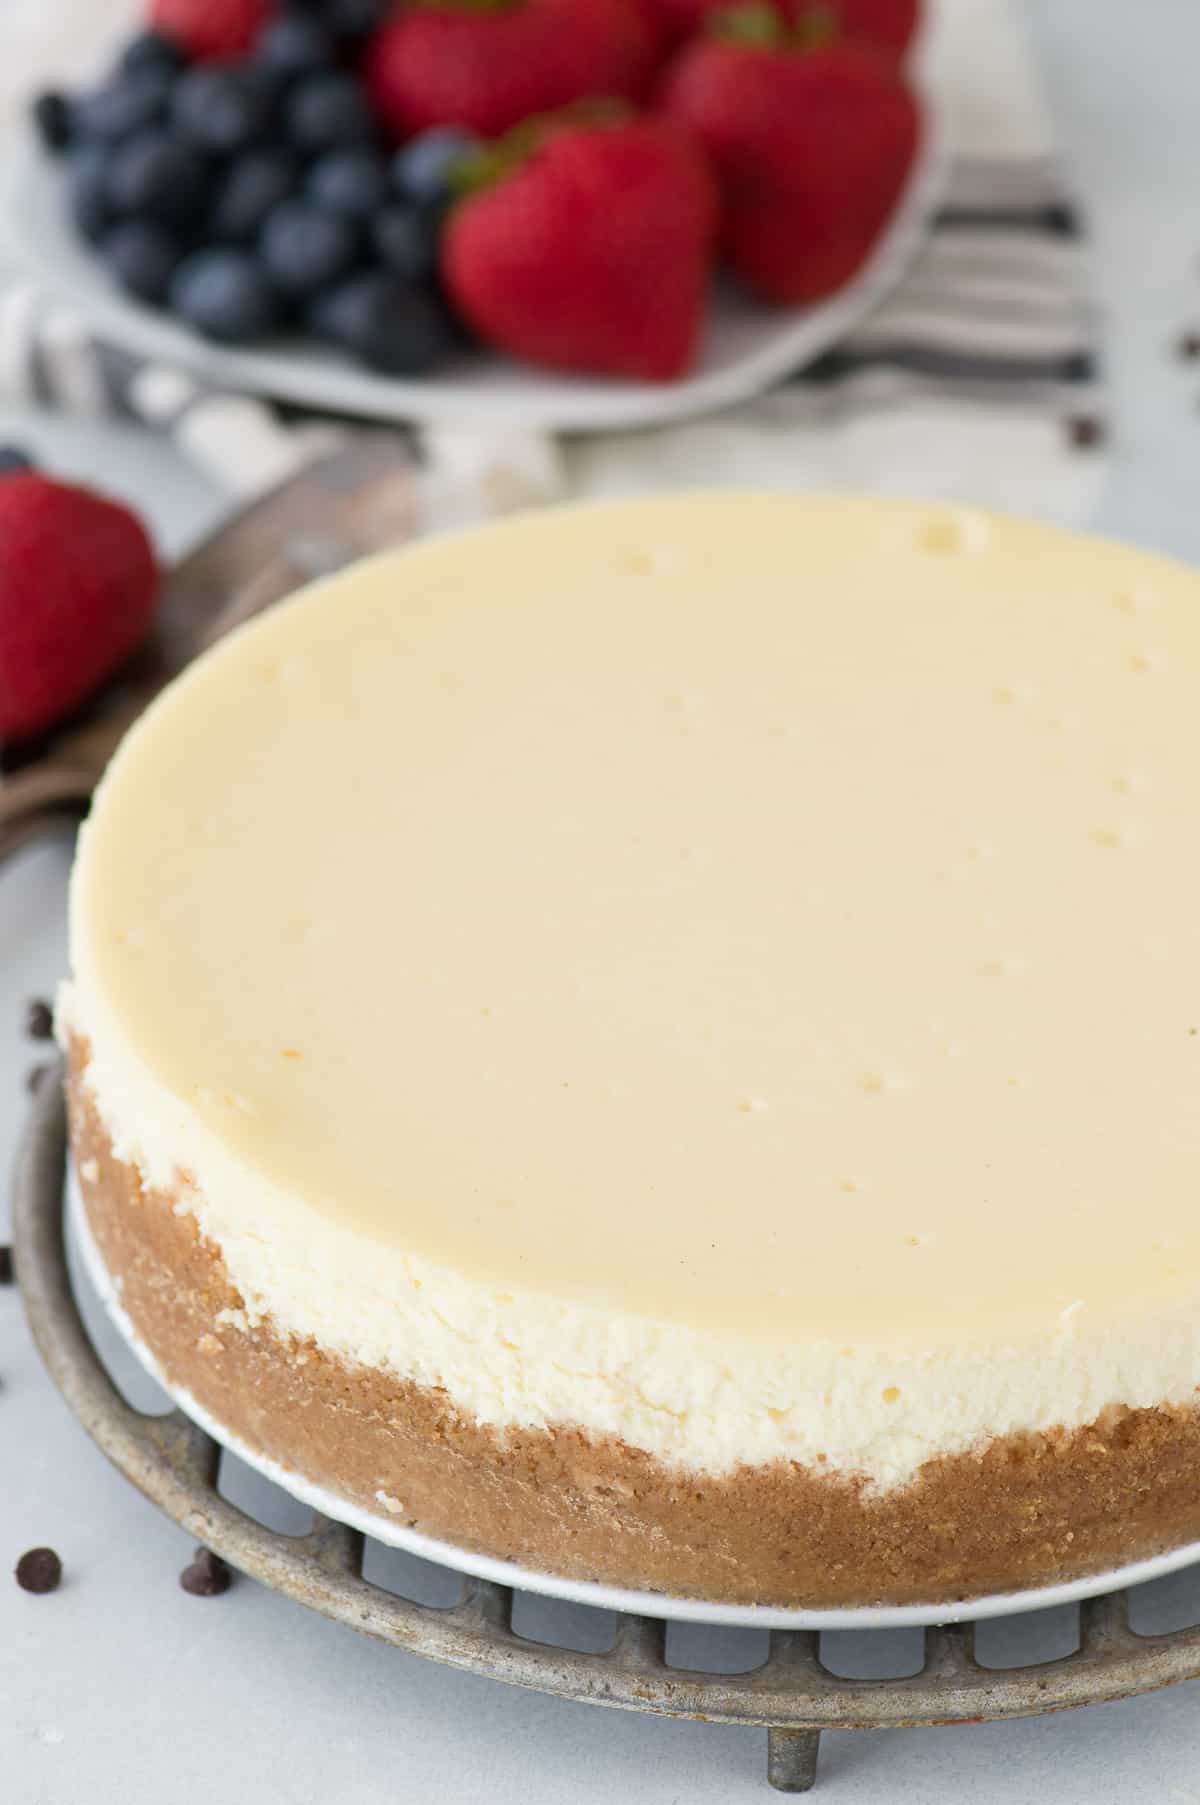 whole classic plain cheesecake with no toppings 